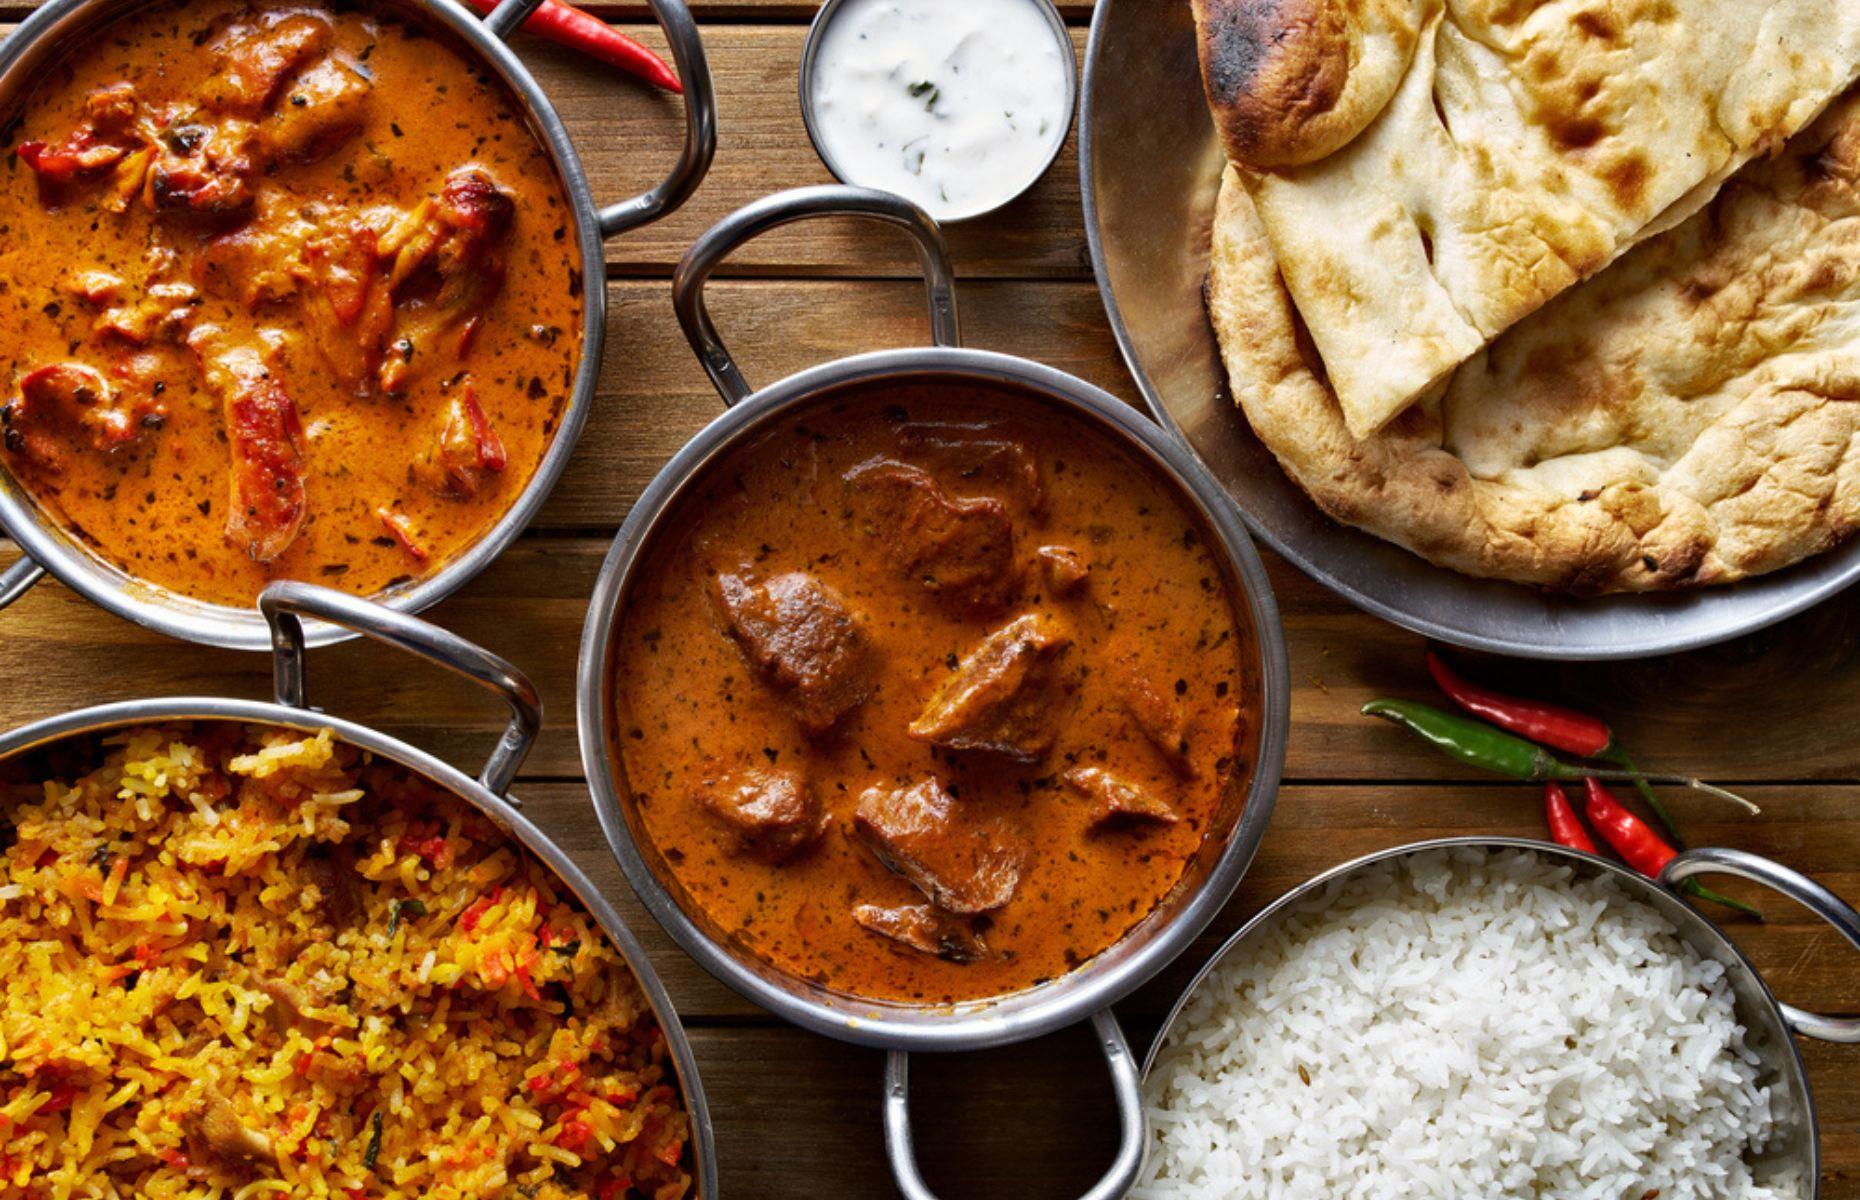 <p>Curry is one of the world's favourite dishes – and a new discovery reveals that it's been cooked and enjoyed outside of India for much longer than we thought. Scientists have found evidence of an 1,800-year-old curry in Southeast Asia, with traces of spices, including ginger, cinnamon and nutmeg, detected on stone tools unearthed in the archaeological site of Óc Eo, in southern Vietnam. It's believed people were enjoying curries and dhals in India up to 4,000 years ago, but the discovery of non-native ingredients in Vietnam shows how the ancient spice trade linked the cuisines of countries thousands of miles from each other.</p>